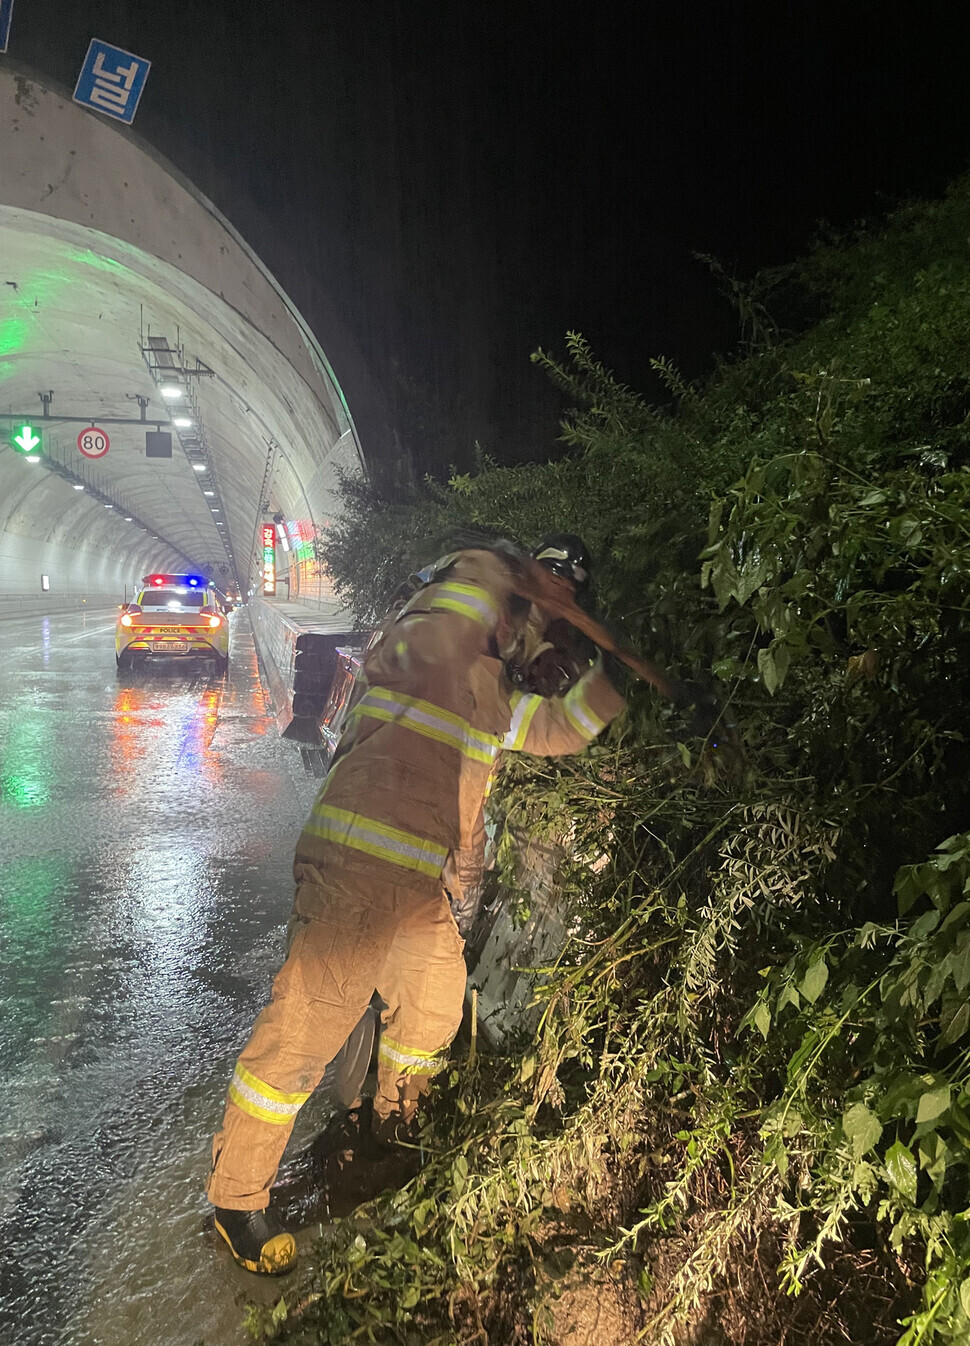 An emergency responder removes debris that had spilled into a road leading into the Gise Tunnel in Dalseong Country, Daegu, in the early hours of Sept. 6. (courtesy Daegu Fire & Safety Department)